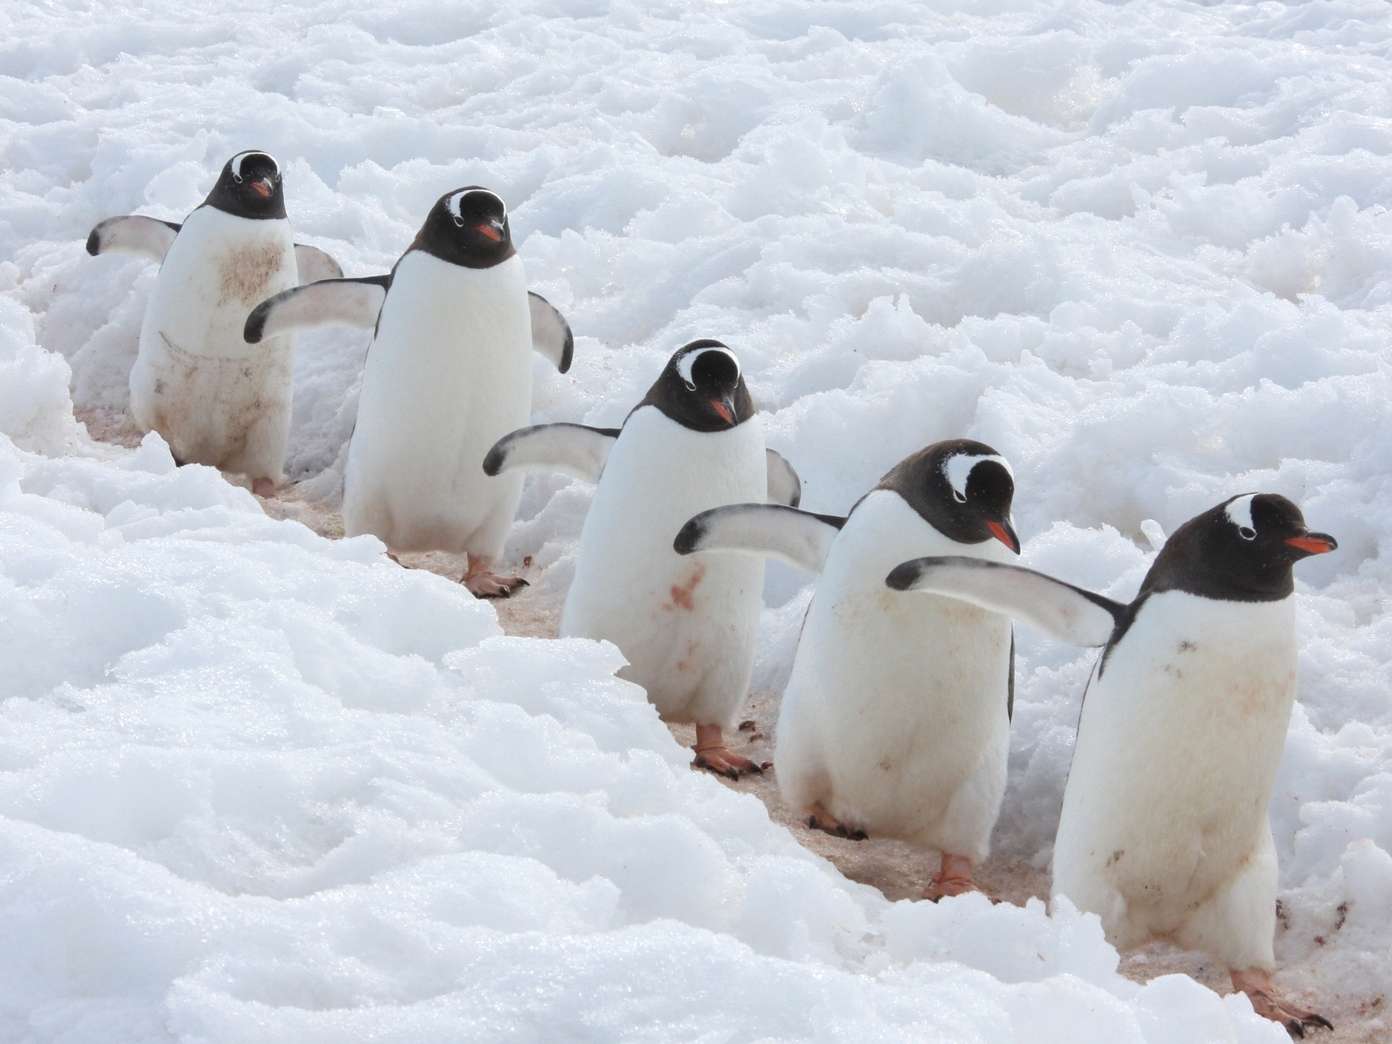 Gentoo penguins spotted on Antarctica cruise